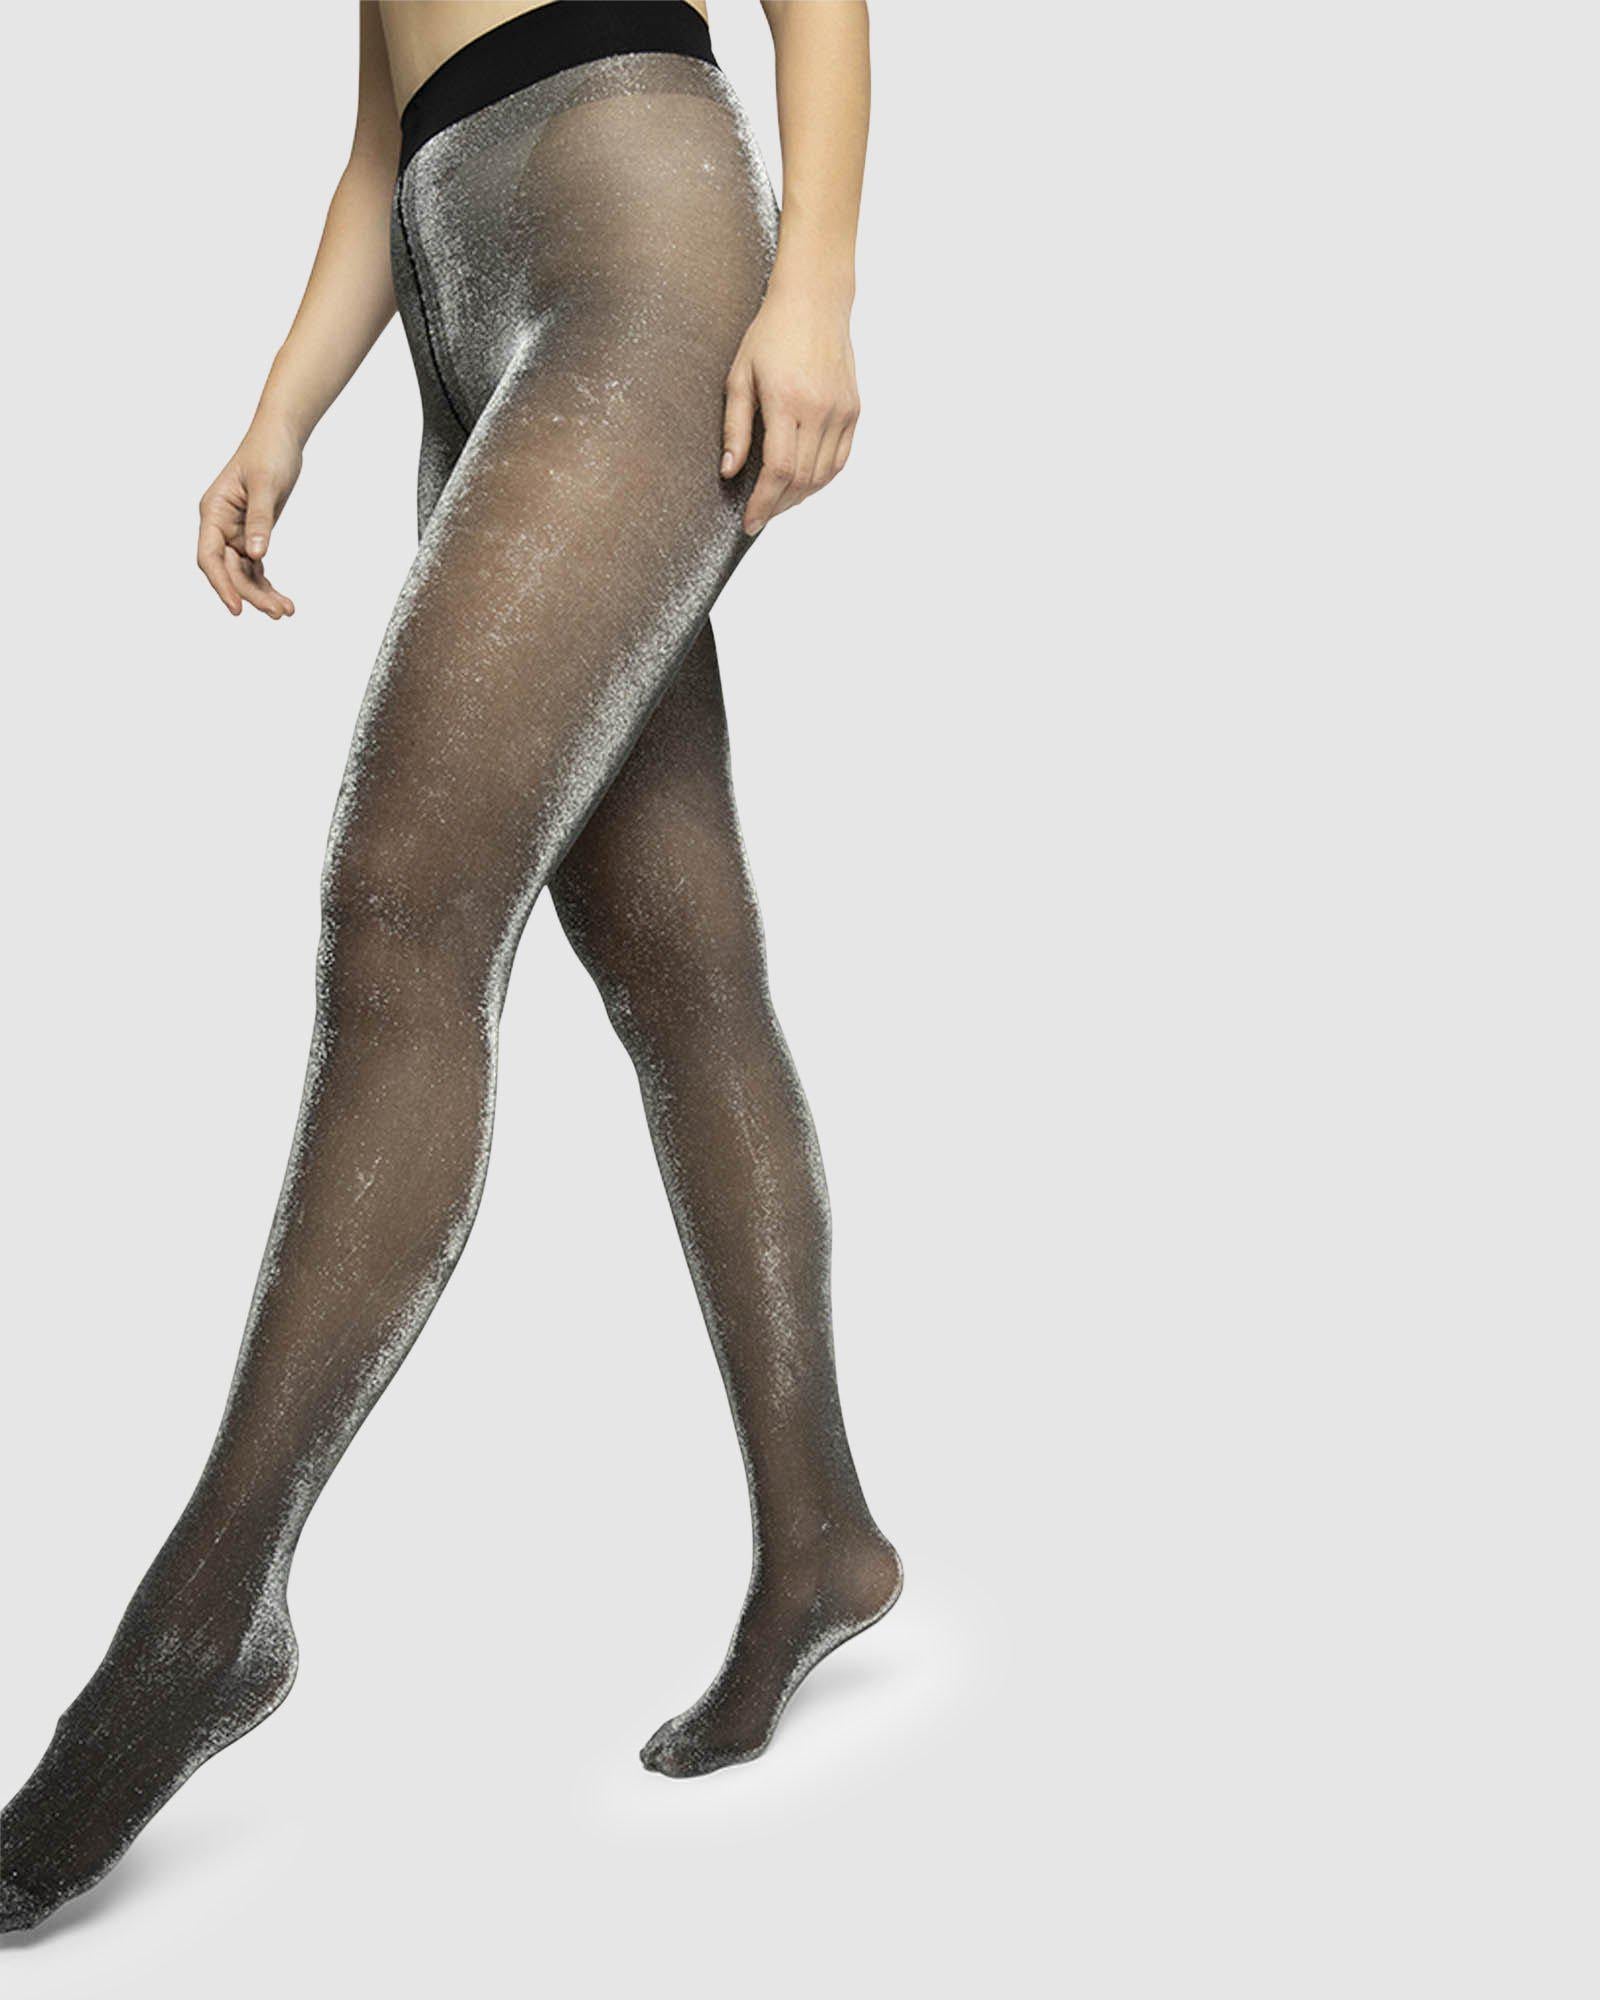 Women's Ultra-thin Silver Glitter Open Crotch Stockings, Sexy Sparkly Tights